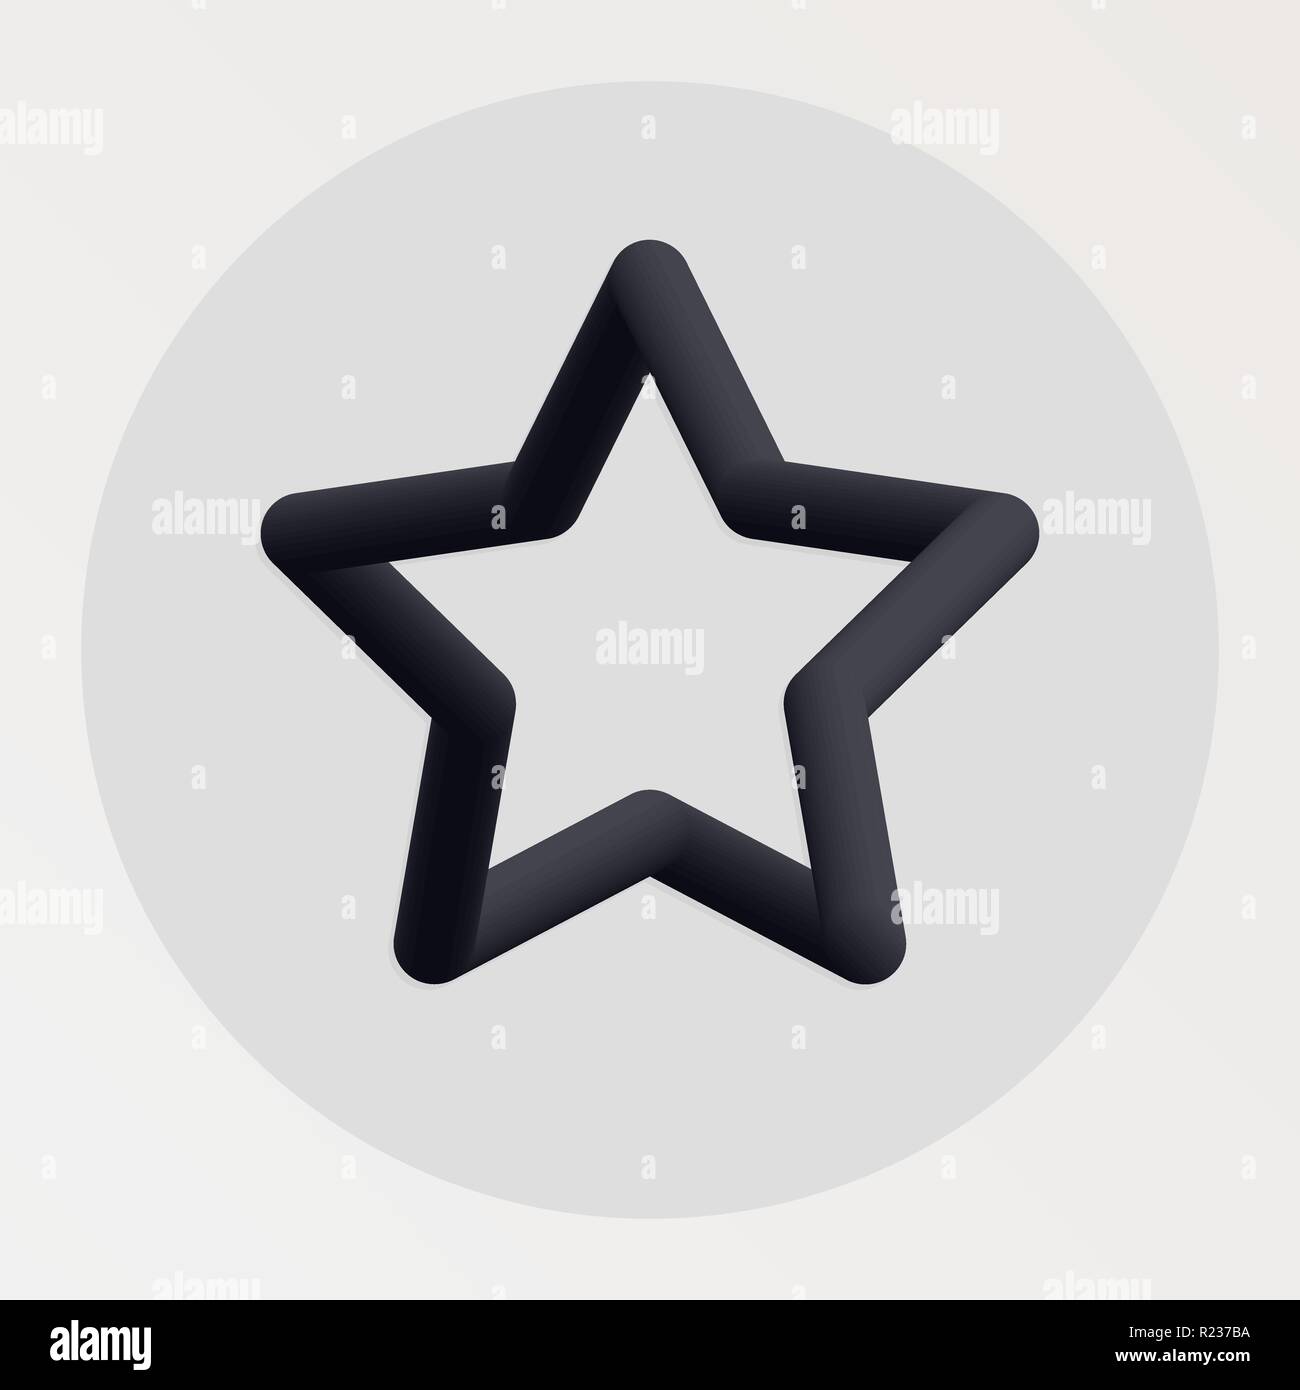 Star blended bold black line icon. Vector illustration of star shape fluid pictogram in a circle over white background for your graphic and web design Stock Vector